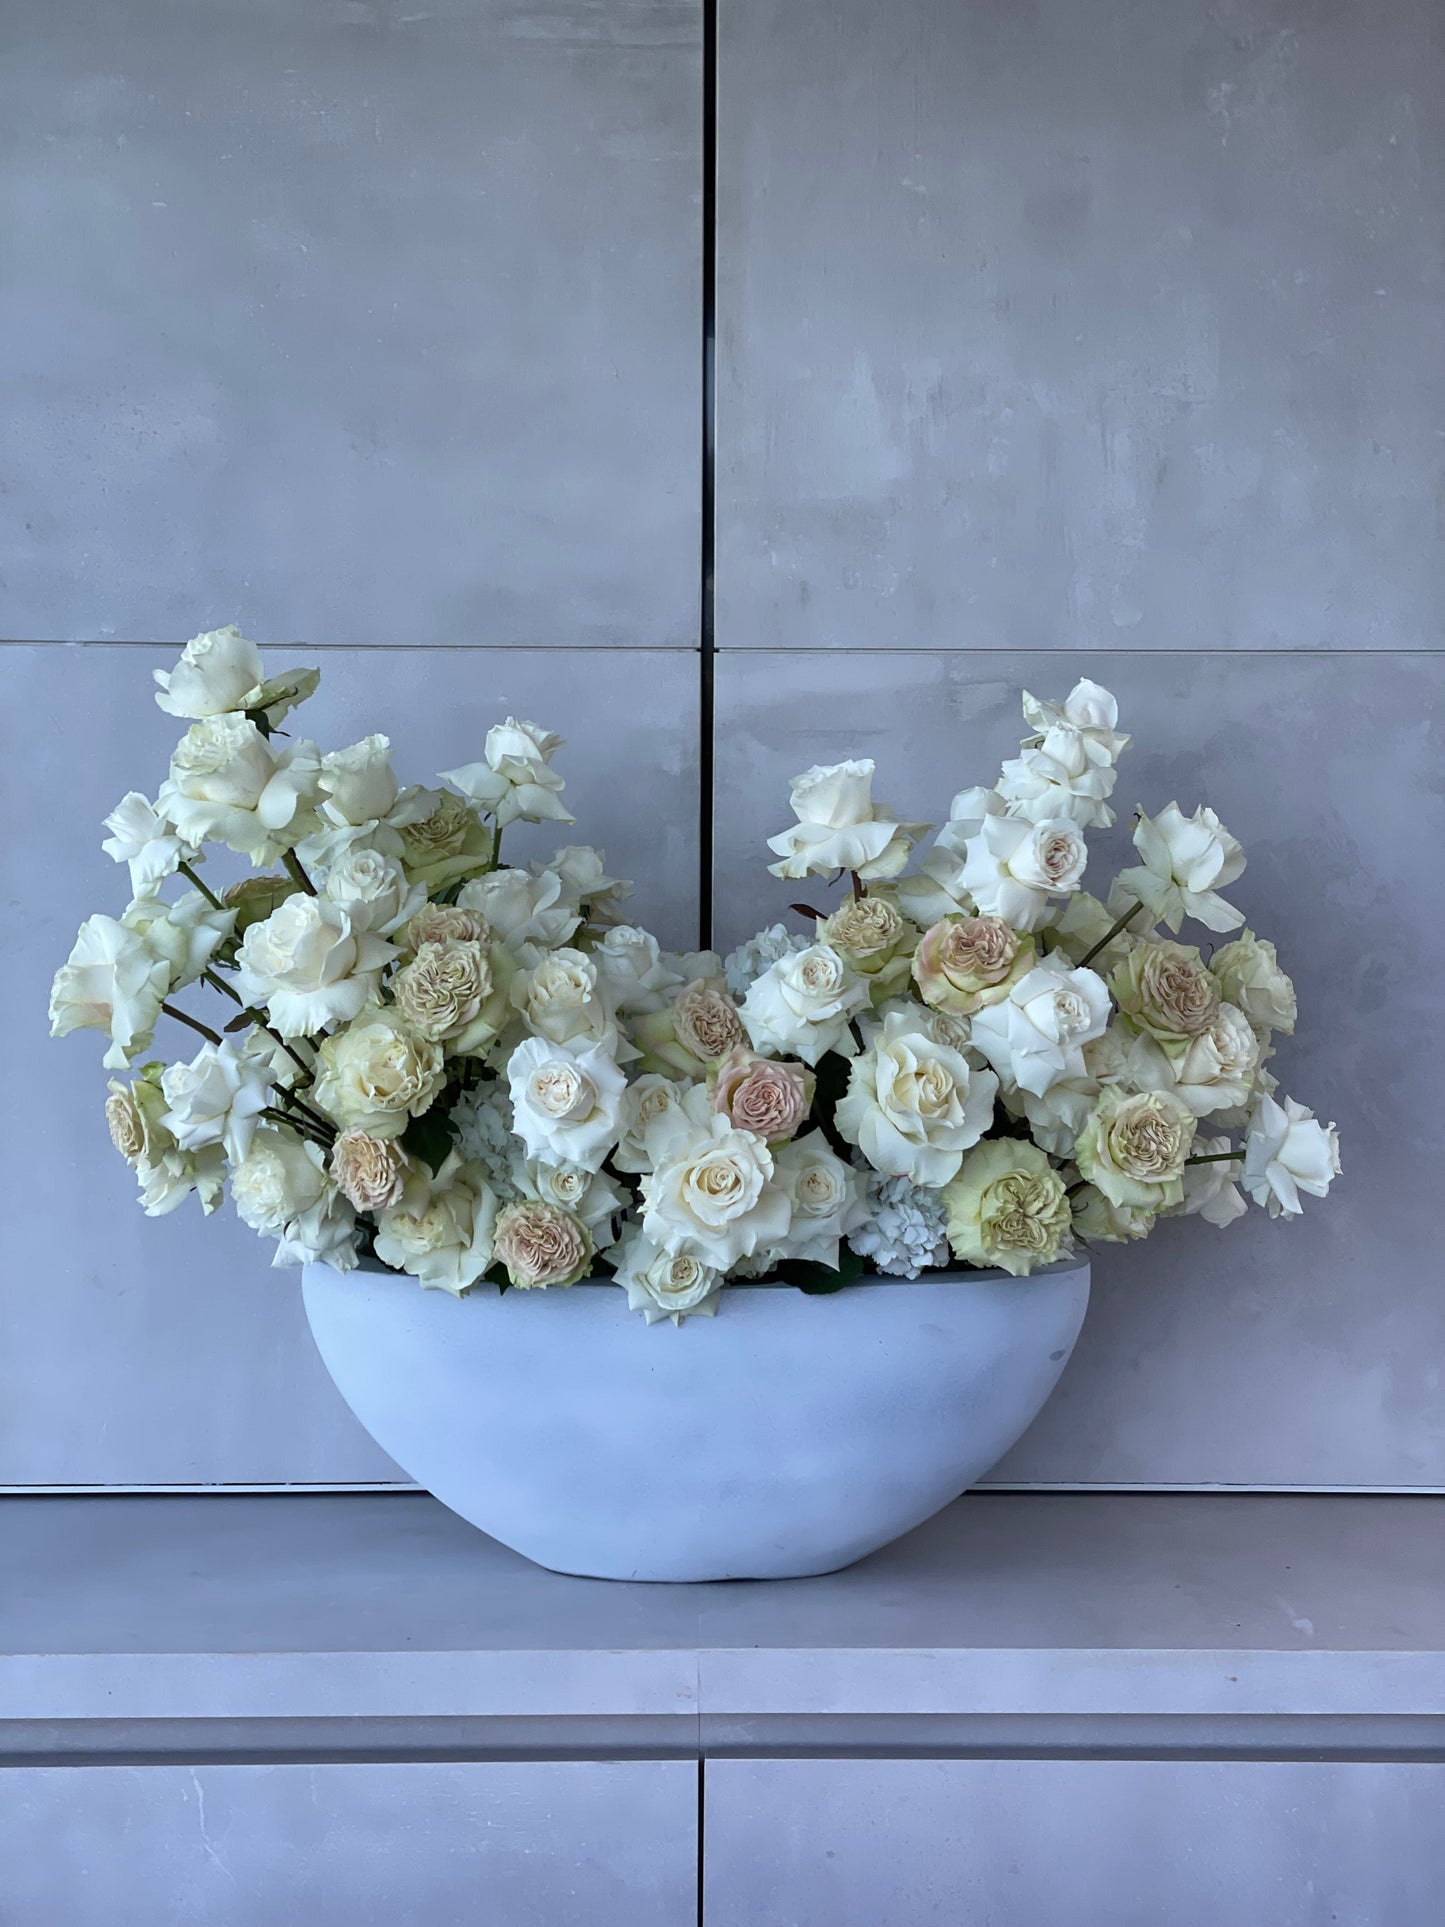 Exclusive vase with exquisite shades of the most beautiful white roses